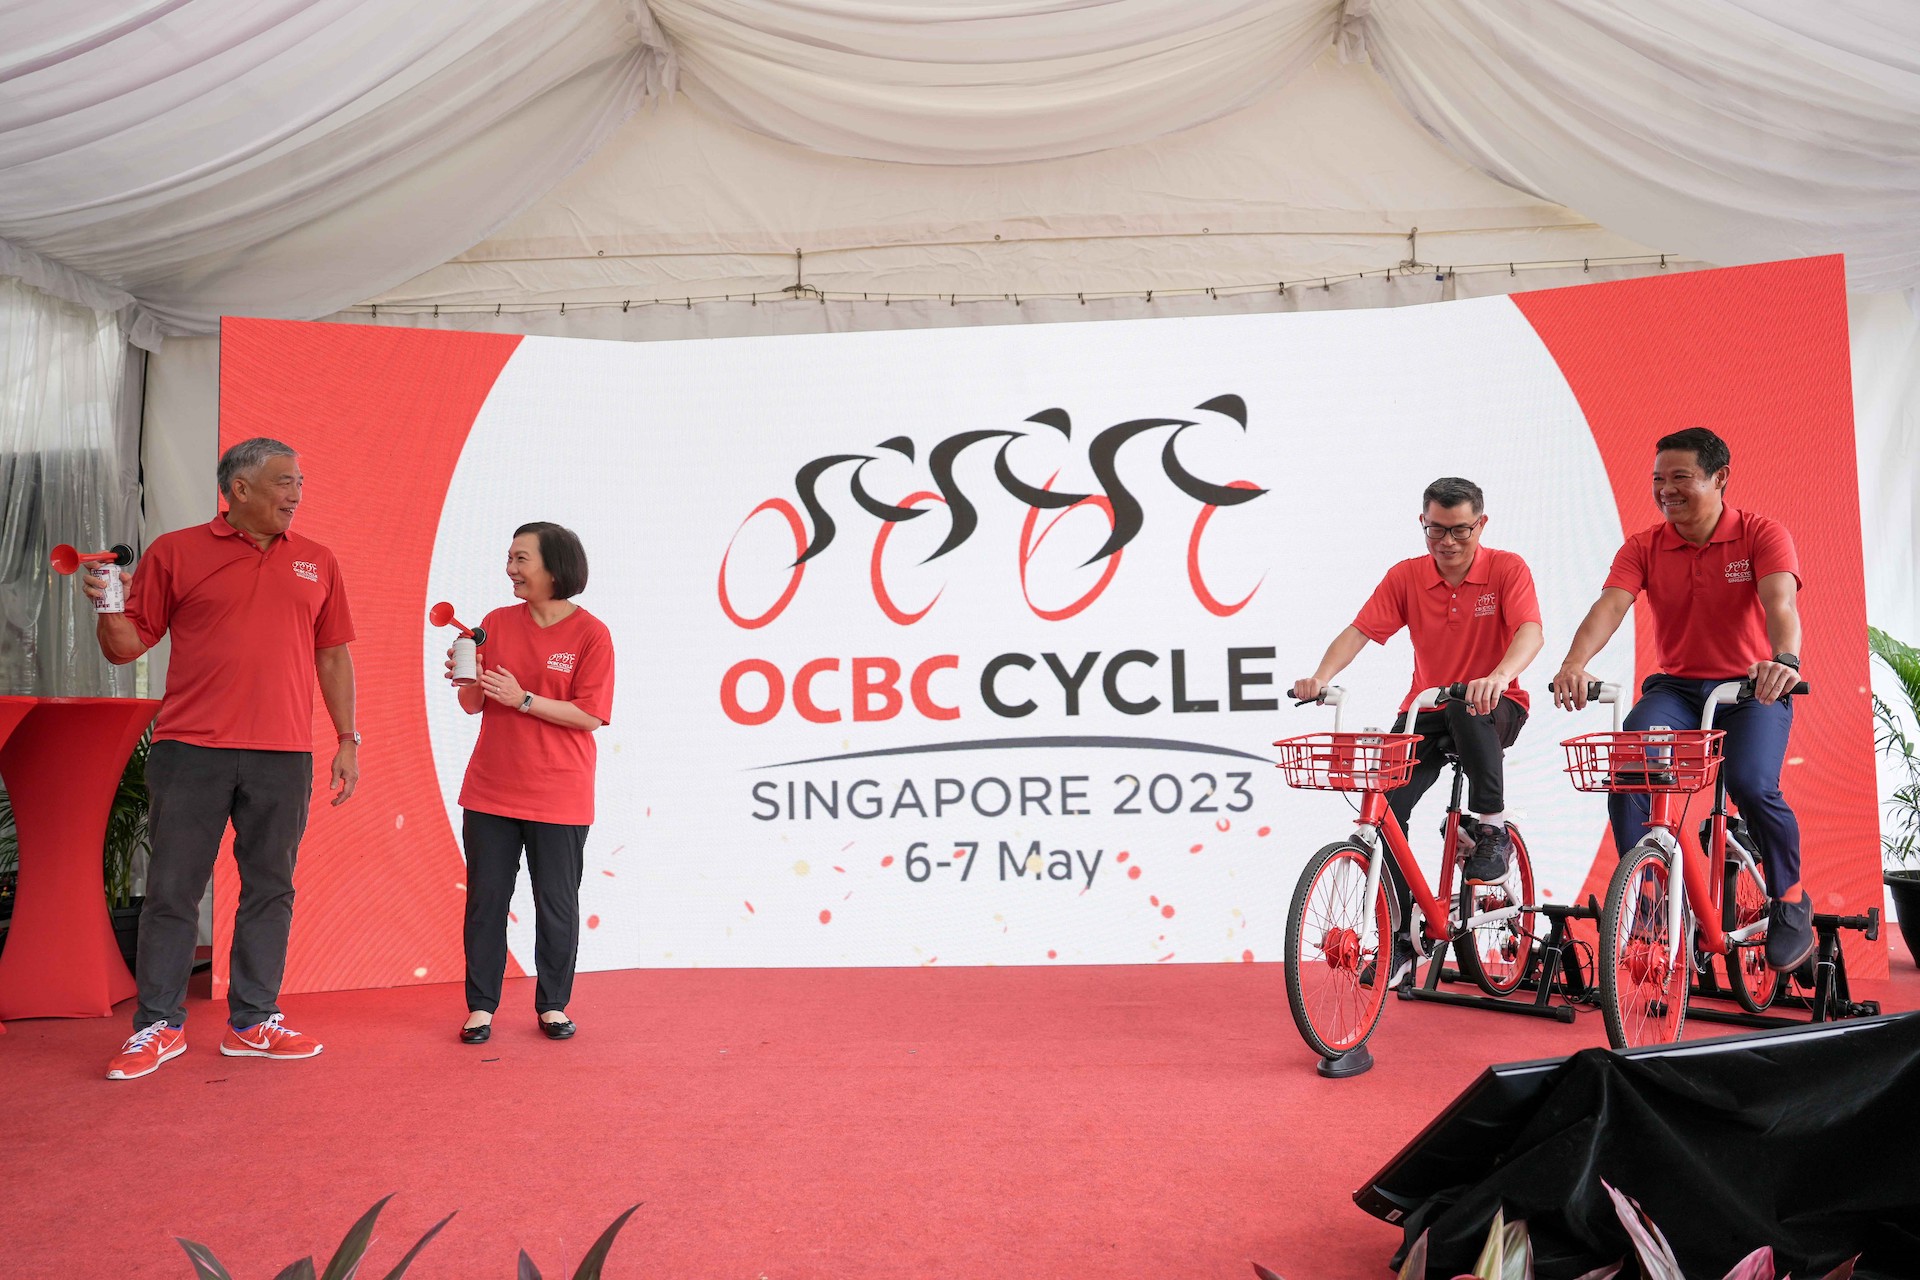 Happy Owl Cycle is proud to be the Friends of OCBC Cycle 2023